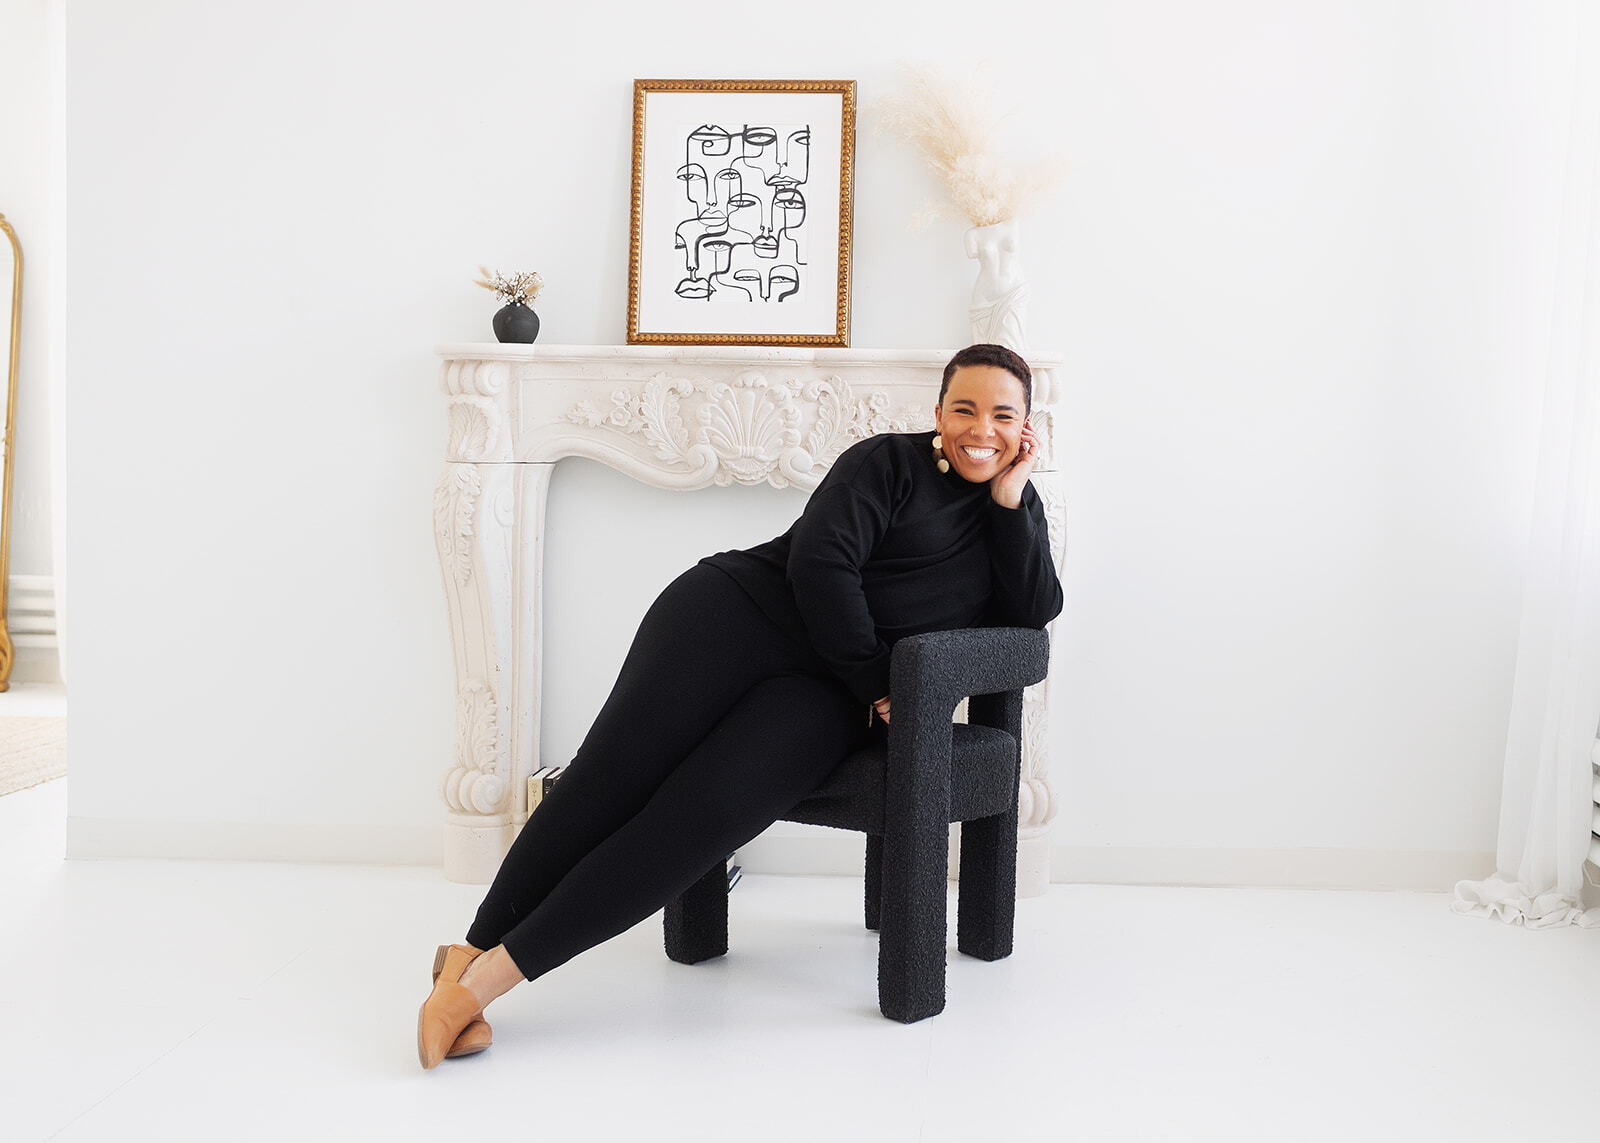 How to Increase Your Productivity with Shanté Brown